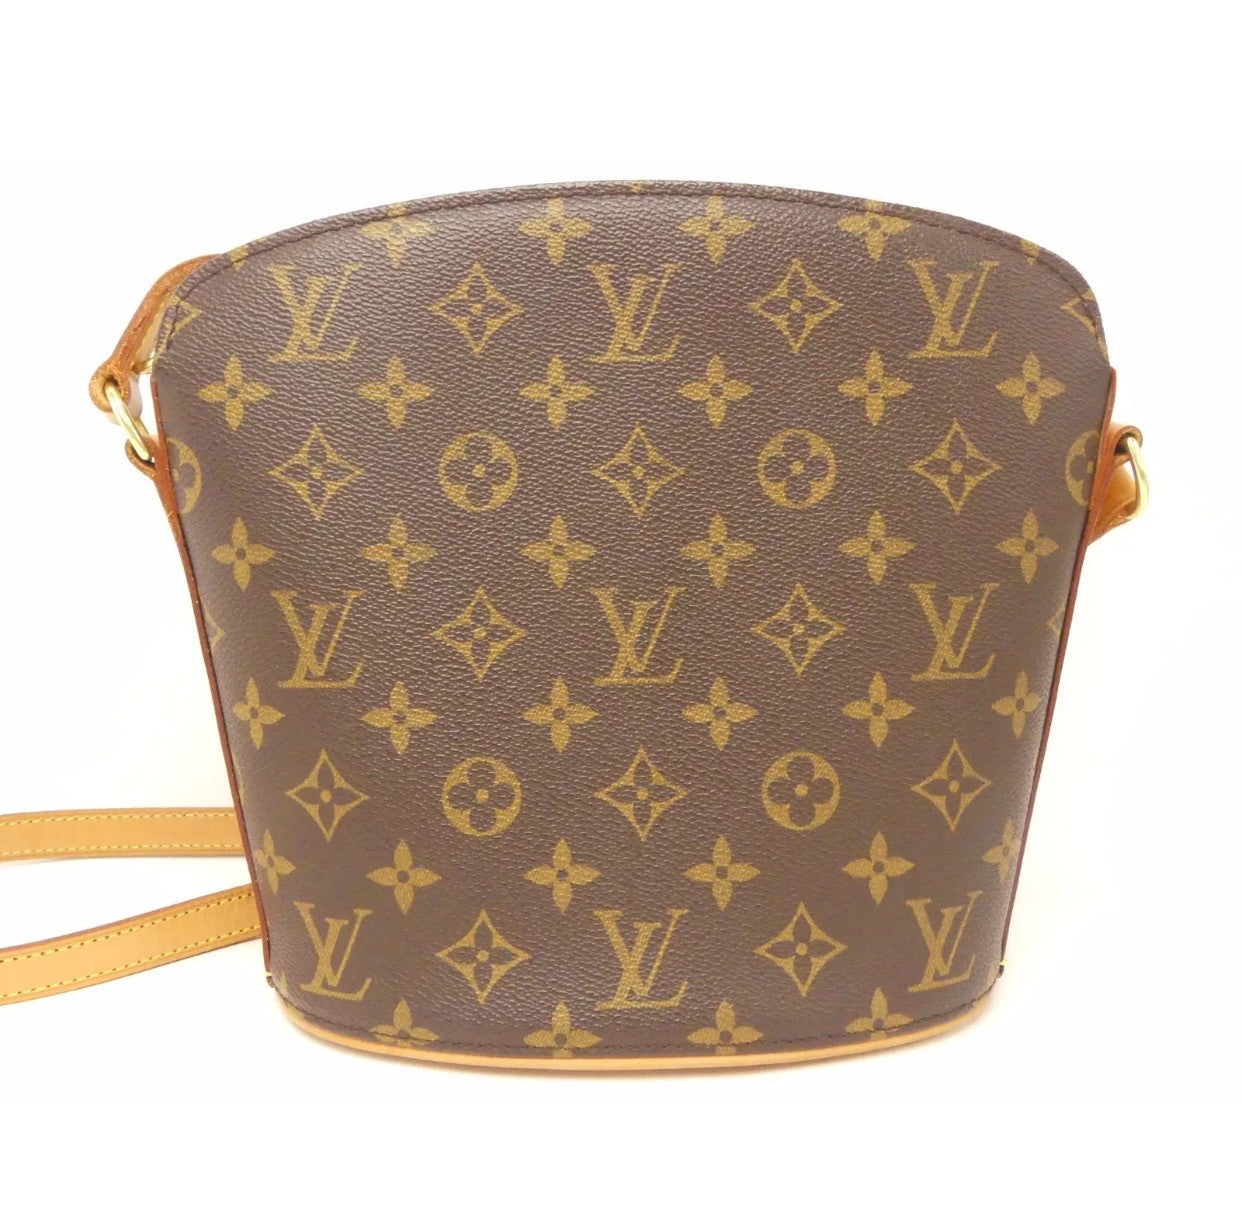 Yes or No? 💕 Come join our Louis Vuitton community to buy, sell